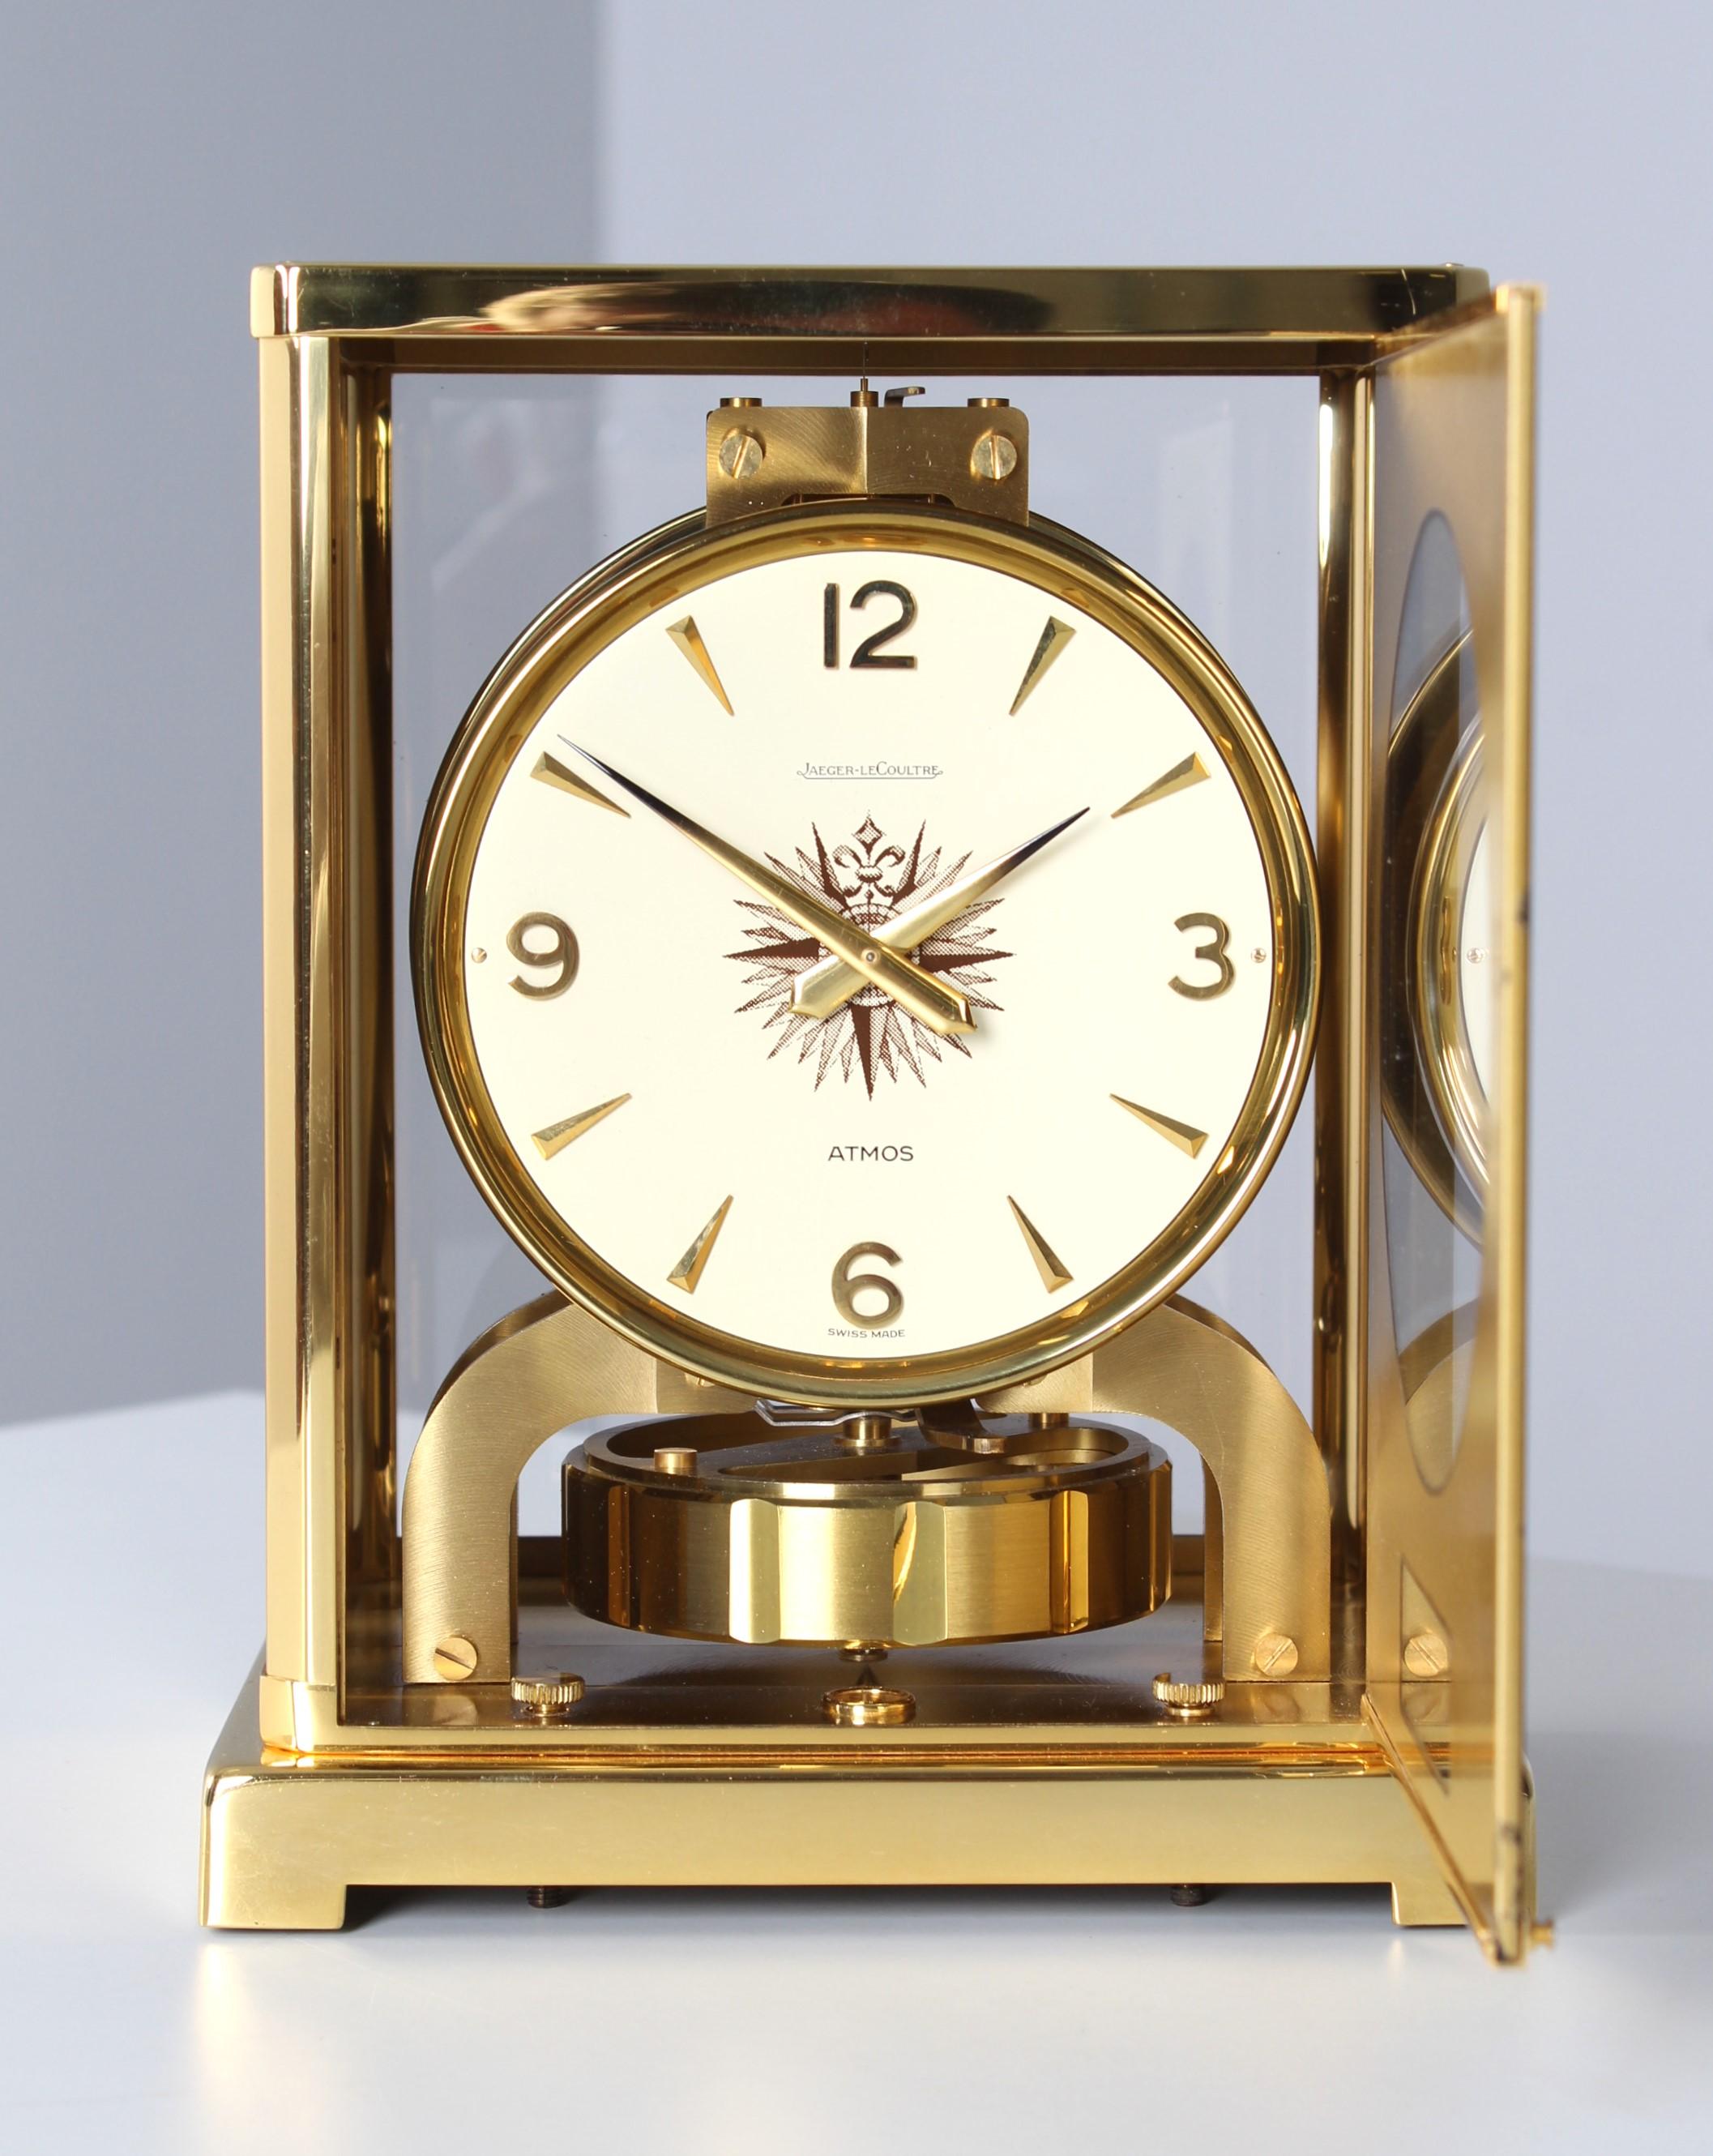 Jaeger LeCoultre, Atmos Clock, Feuille D'Or, Caravelle, Swiss Made in 1966 7